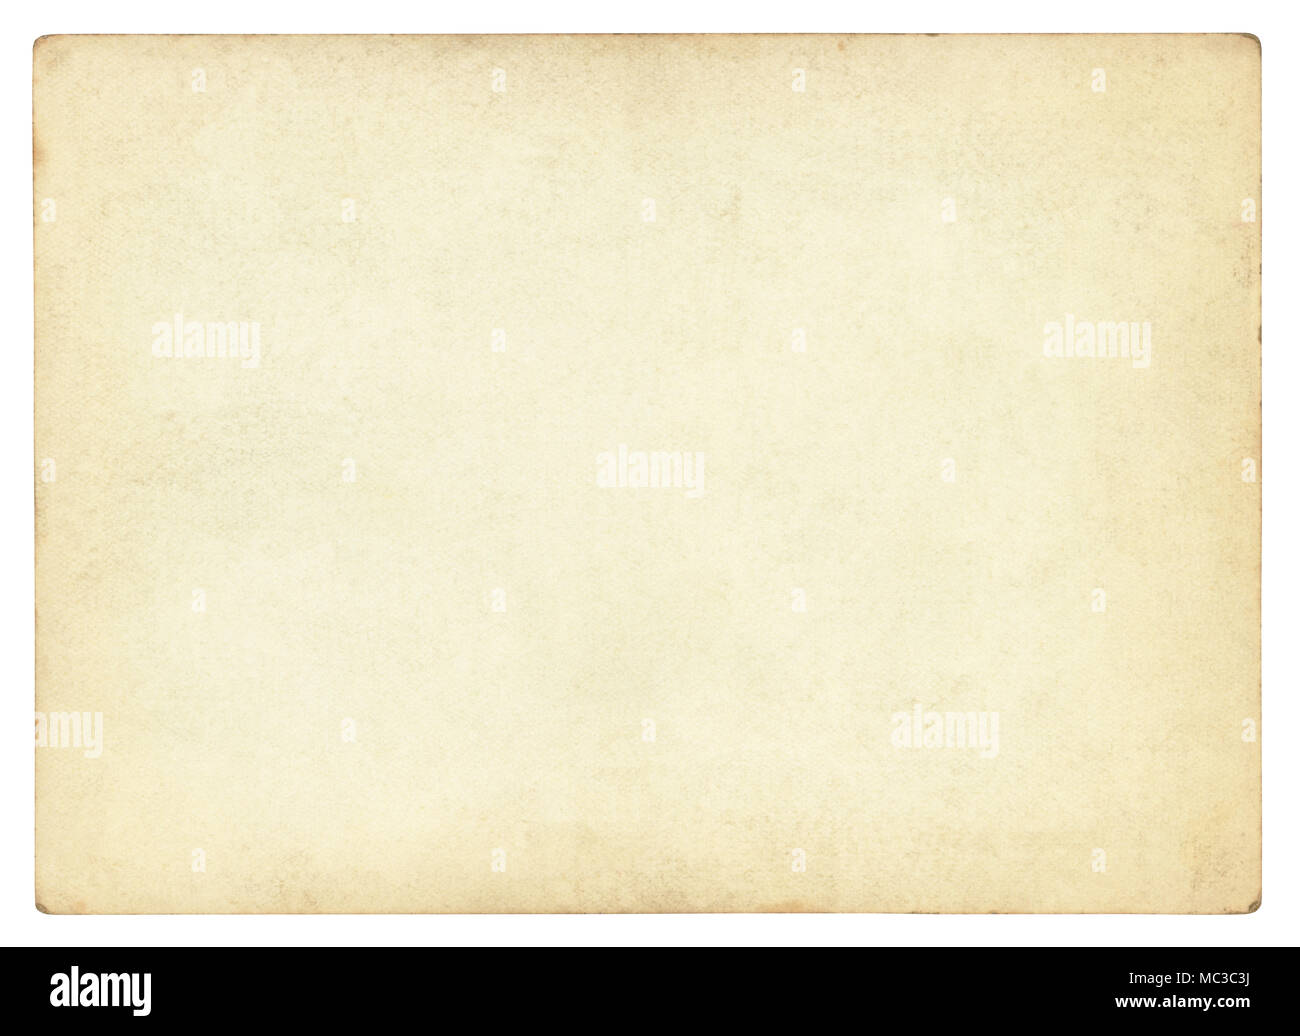 Parchment Paper Vintage An Aged Texture With Blank Space For Adding Light  Elements Backgrounds